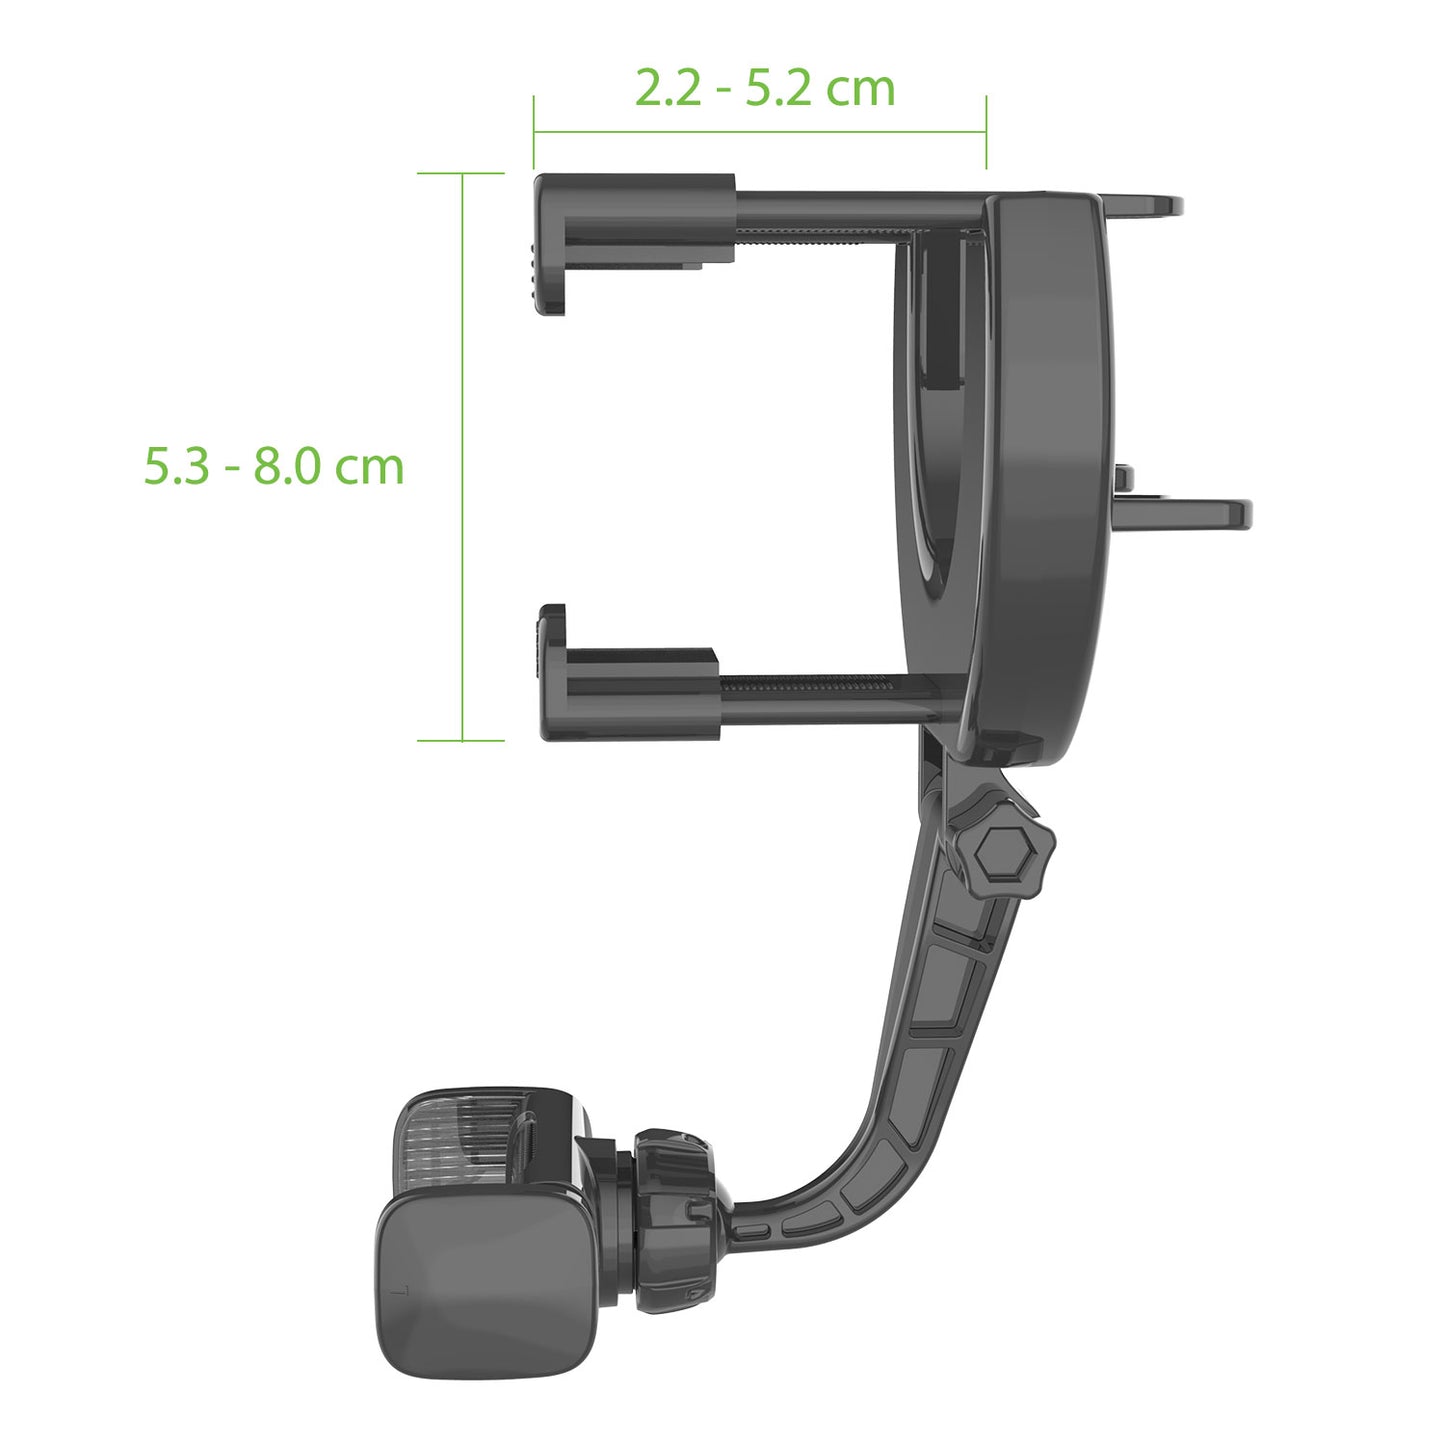 Car Rear-view Mirror Mount Phone Holder, 360 Degree Rotating, Adjustable Brackets Compatible for iPhones Galaxy Z Fold, Z Flip, Google Pixel, Moto